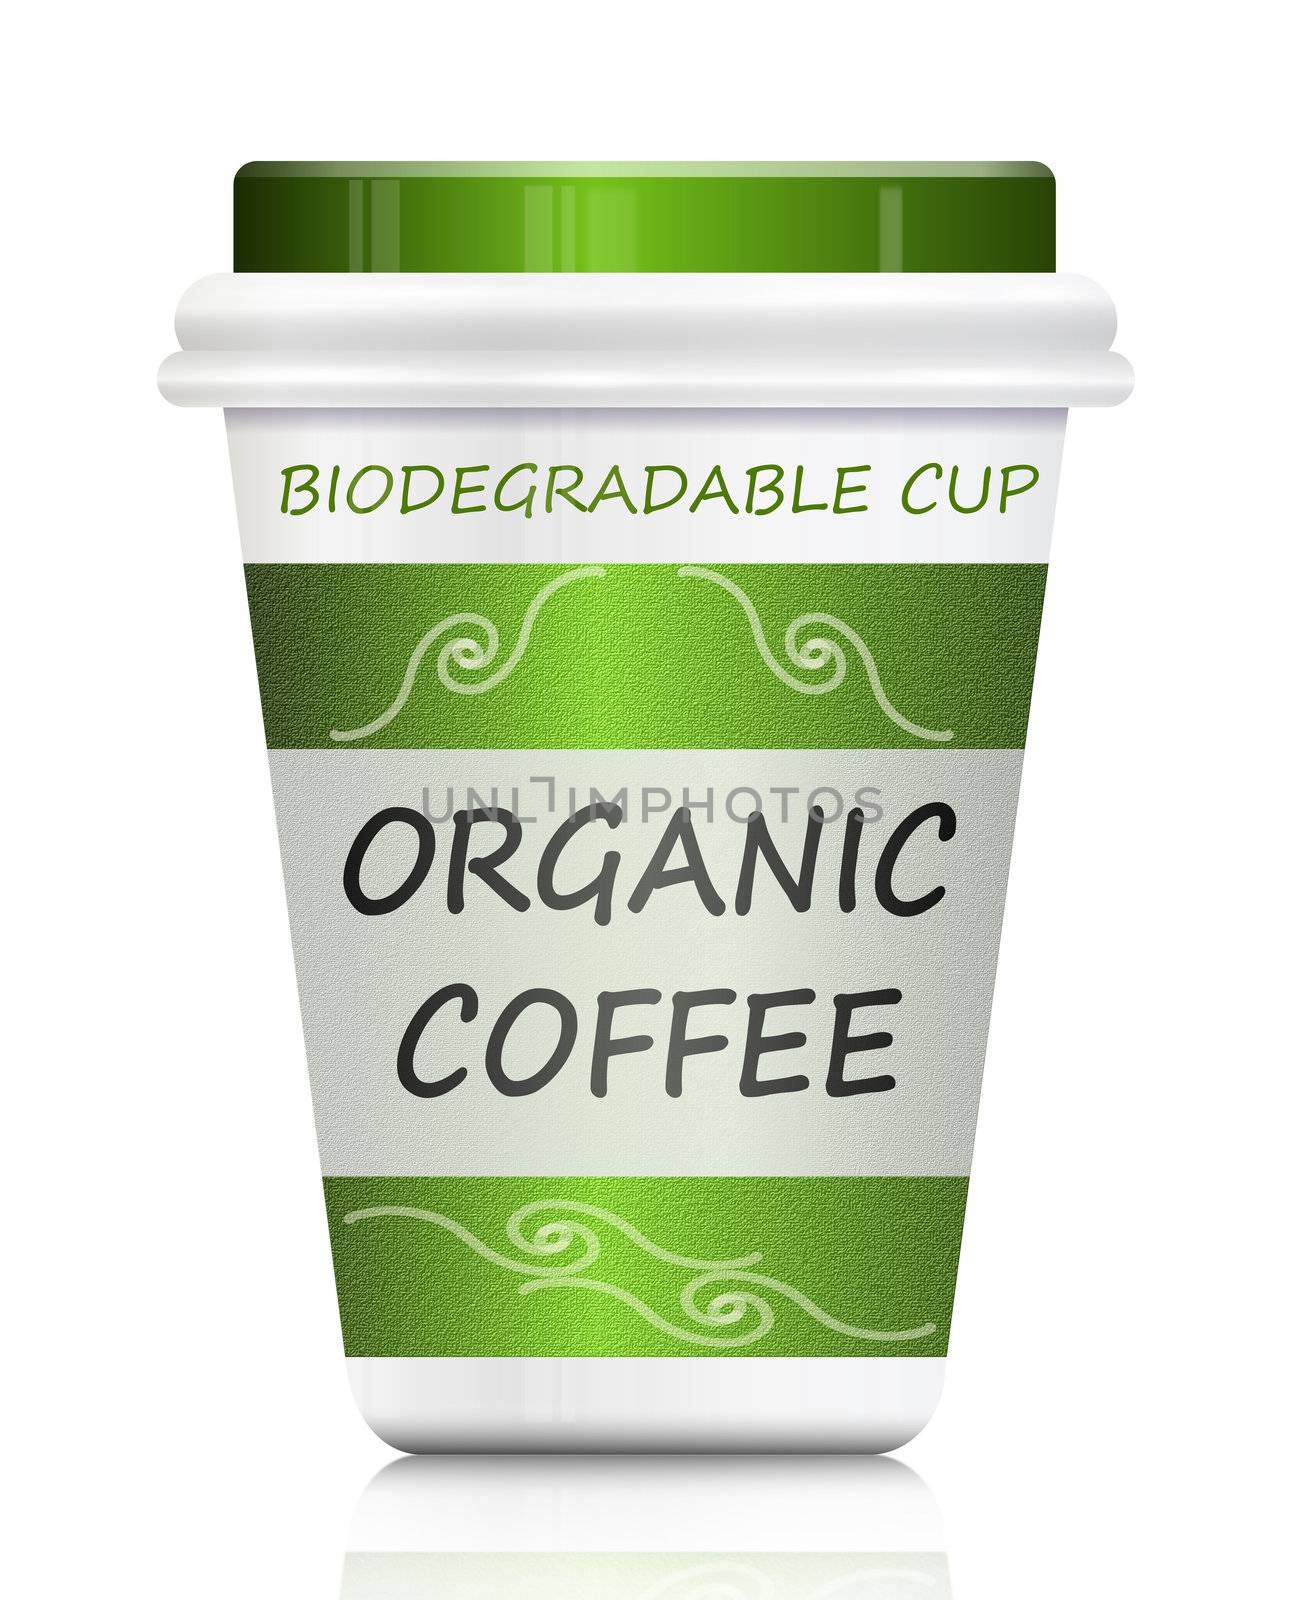 Illustration depicting a single organic coffee take out biodegradable container arranged over white.